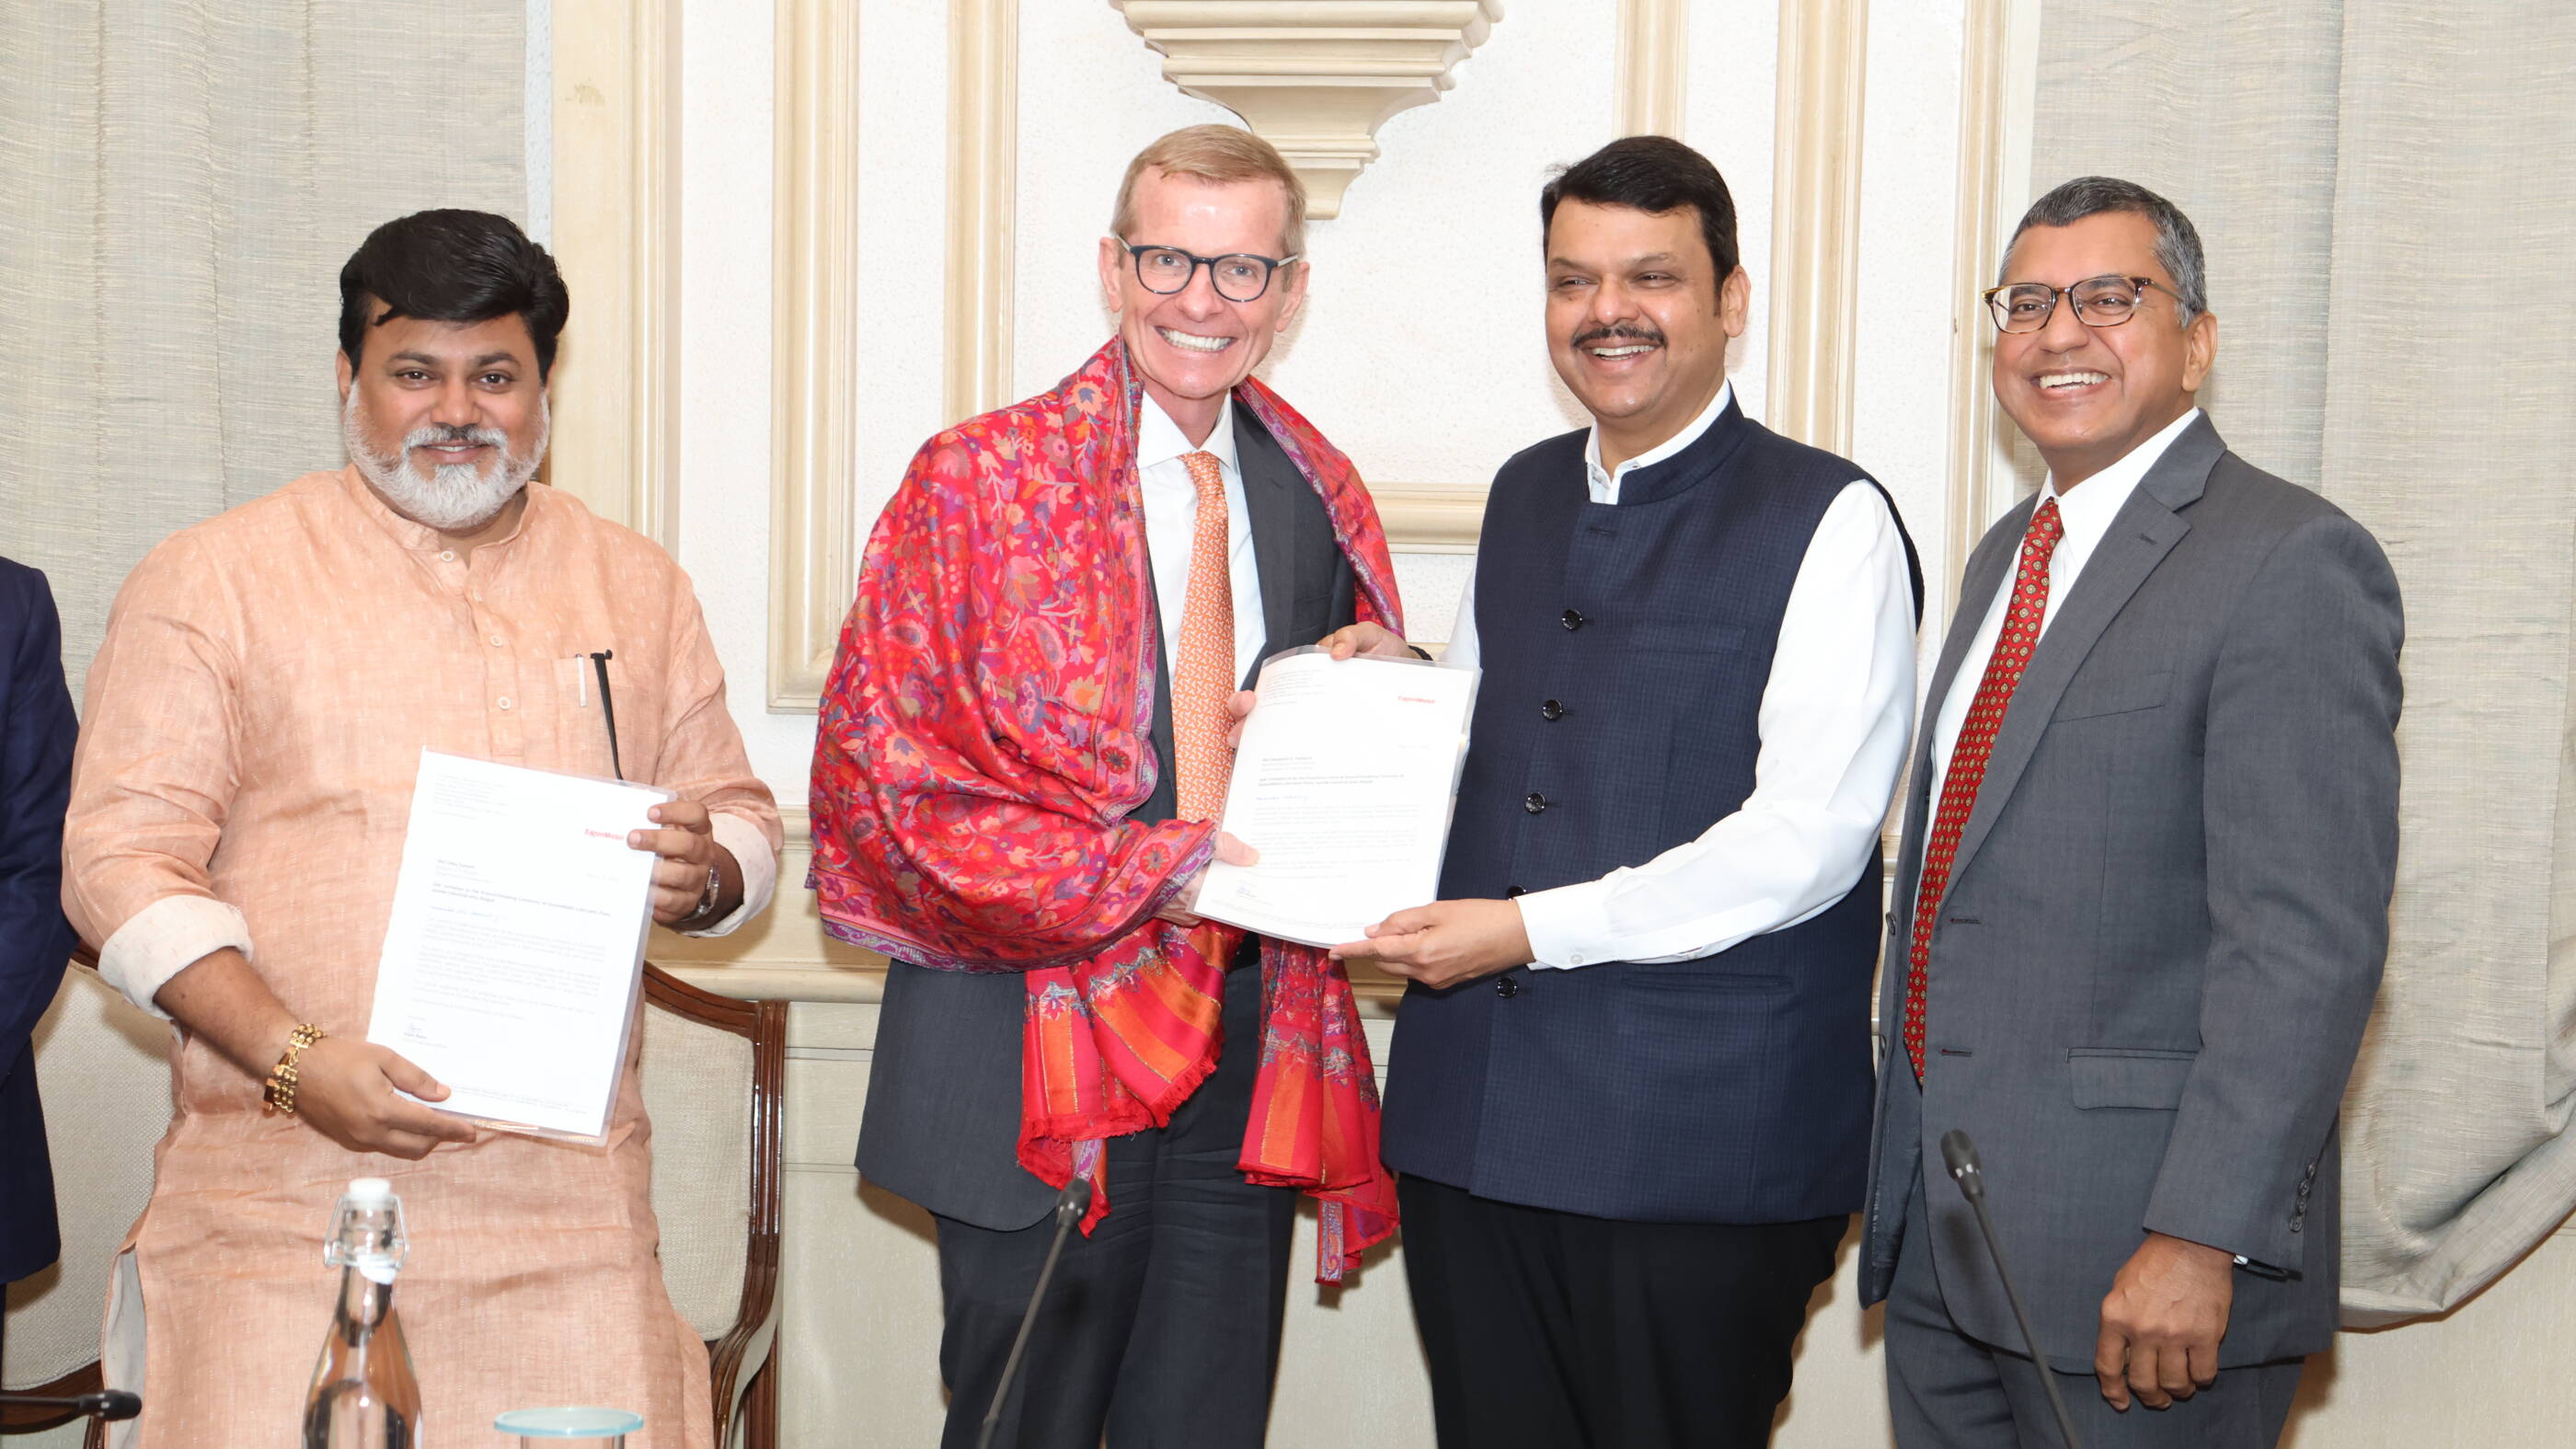 Image (From left to right) Industry Minister of Maharashtra Uday Samant, India LCM Monte Dobson, Deputy Chief Minister of Maharashtra Devendra Fadnavis and ExxonMobil Lubricants Pvt. Ltd CEO Vipin Rana